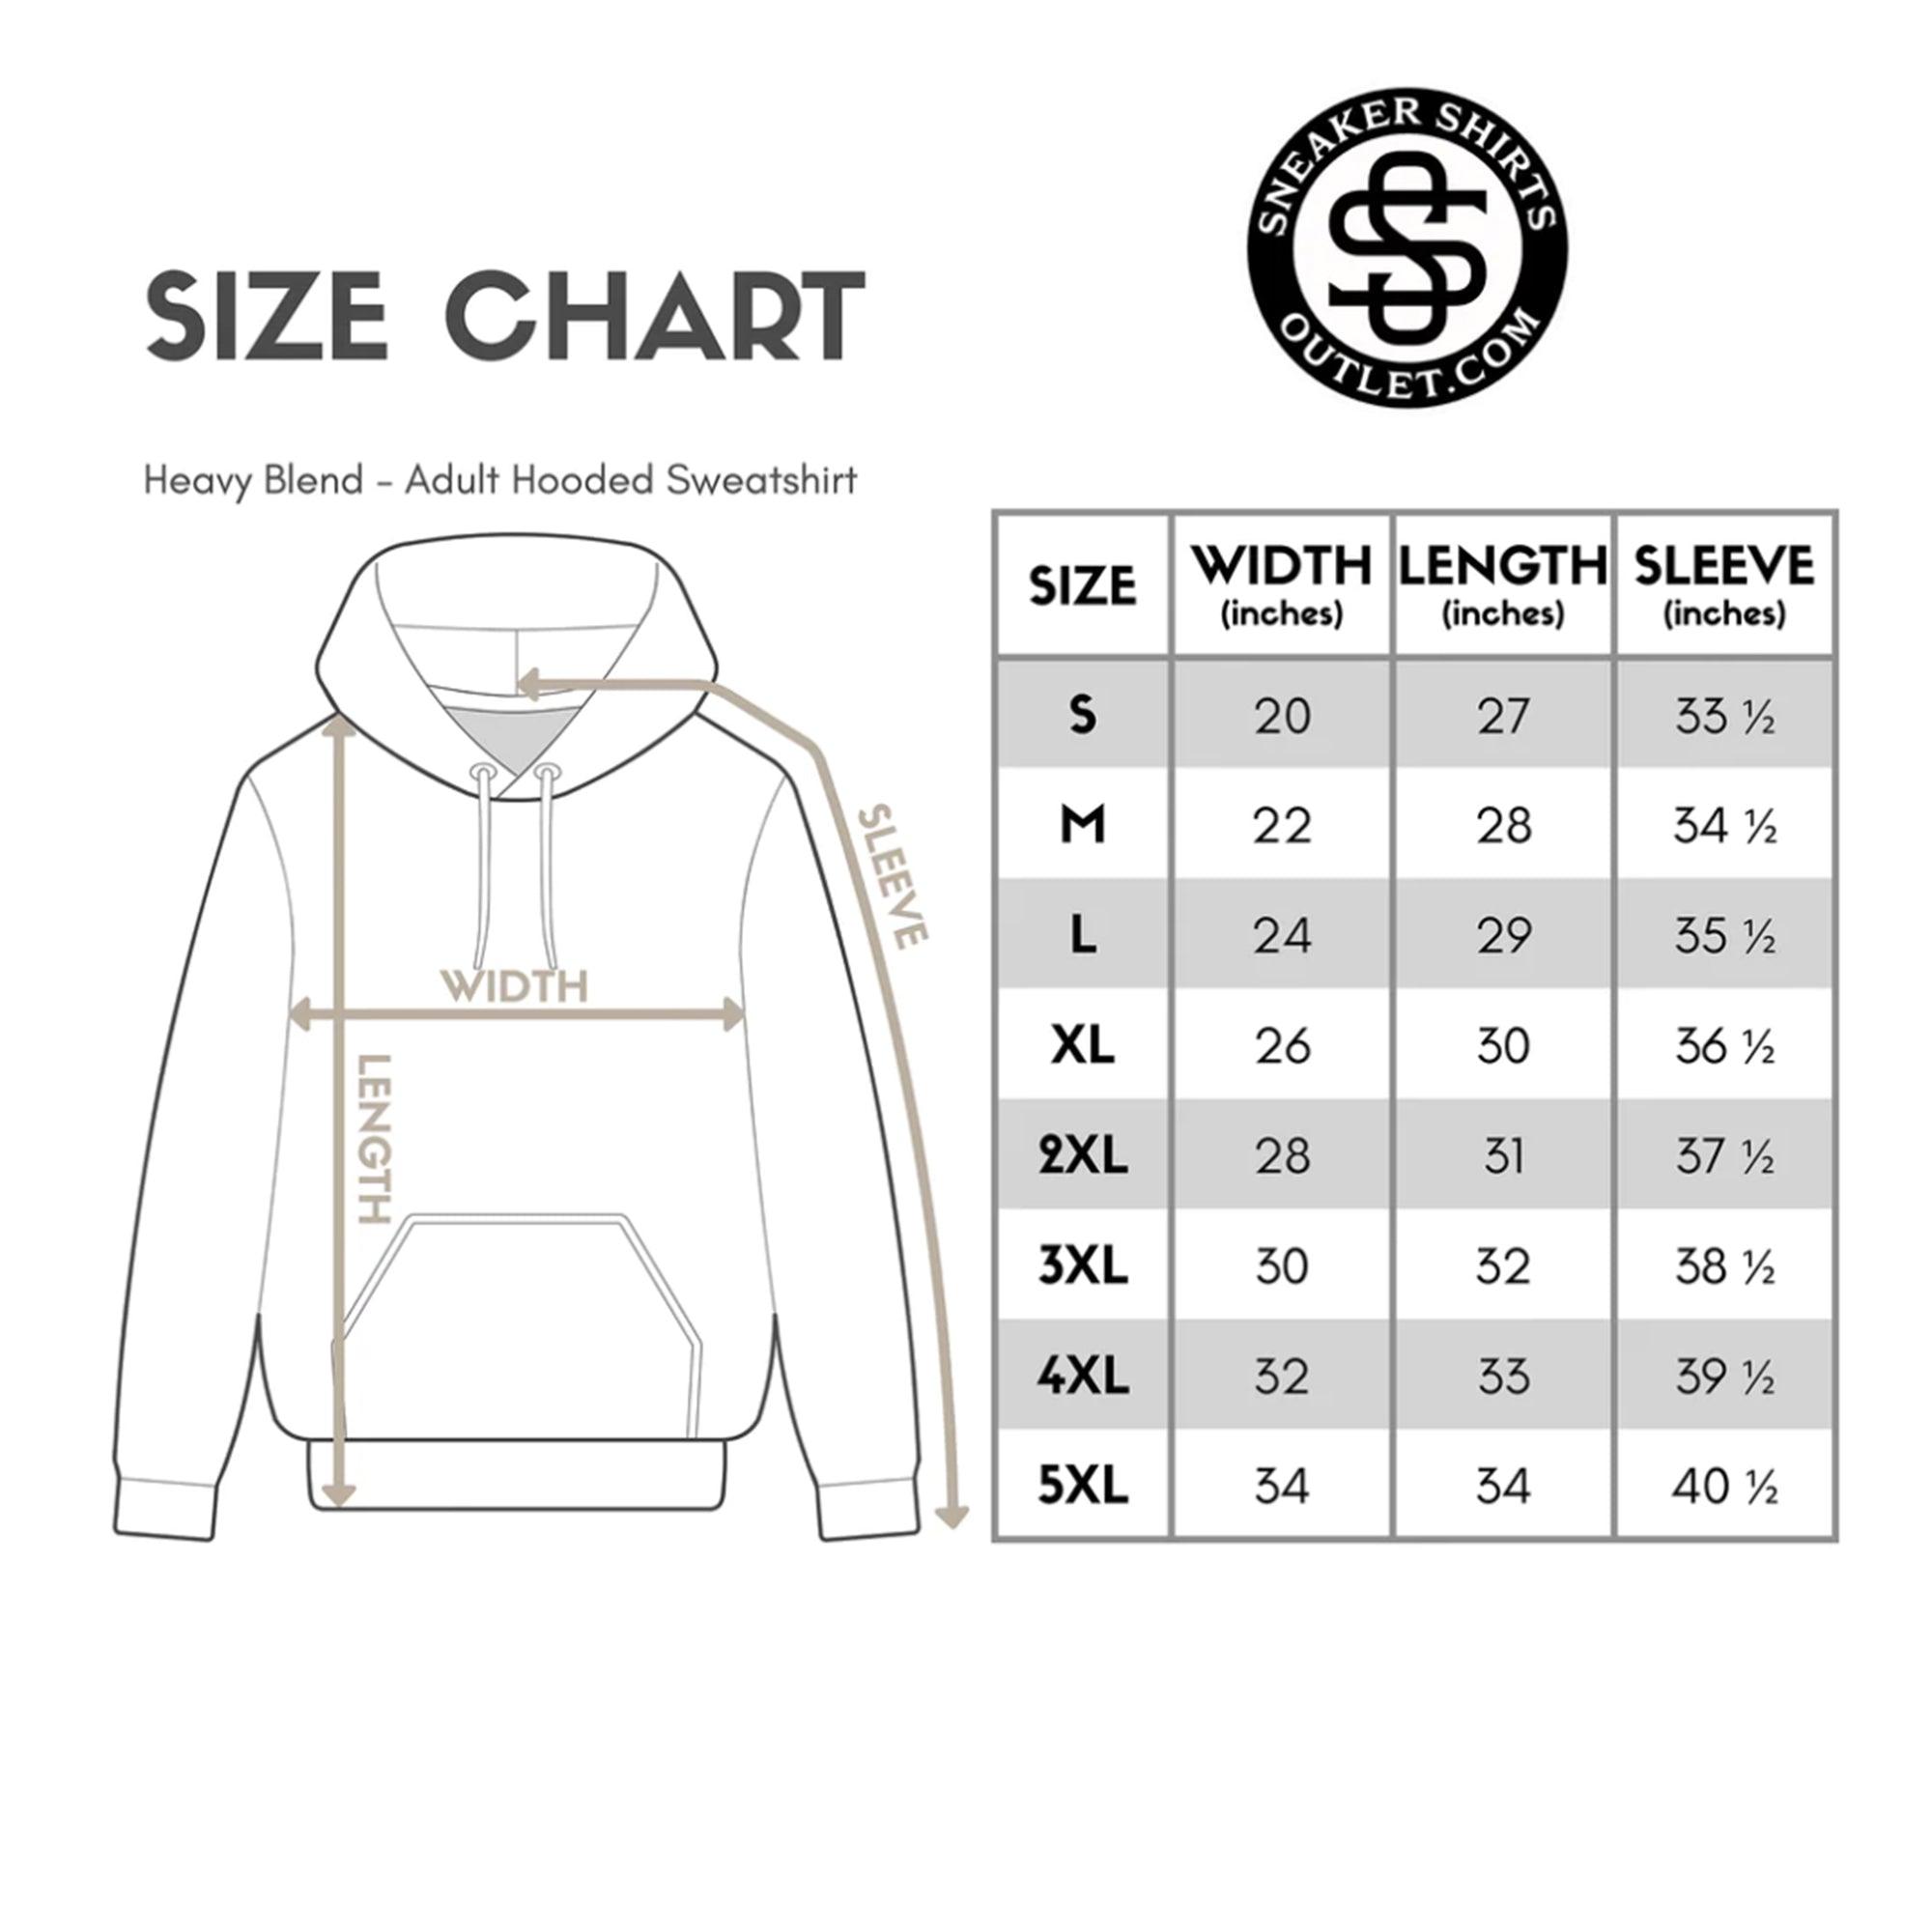 Paper Chaser Hoodie size chart photo